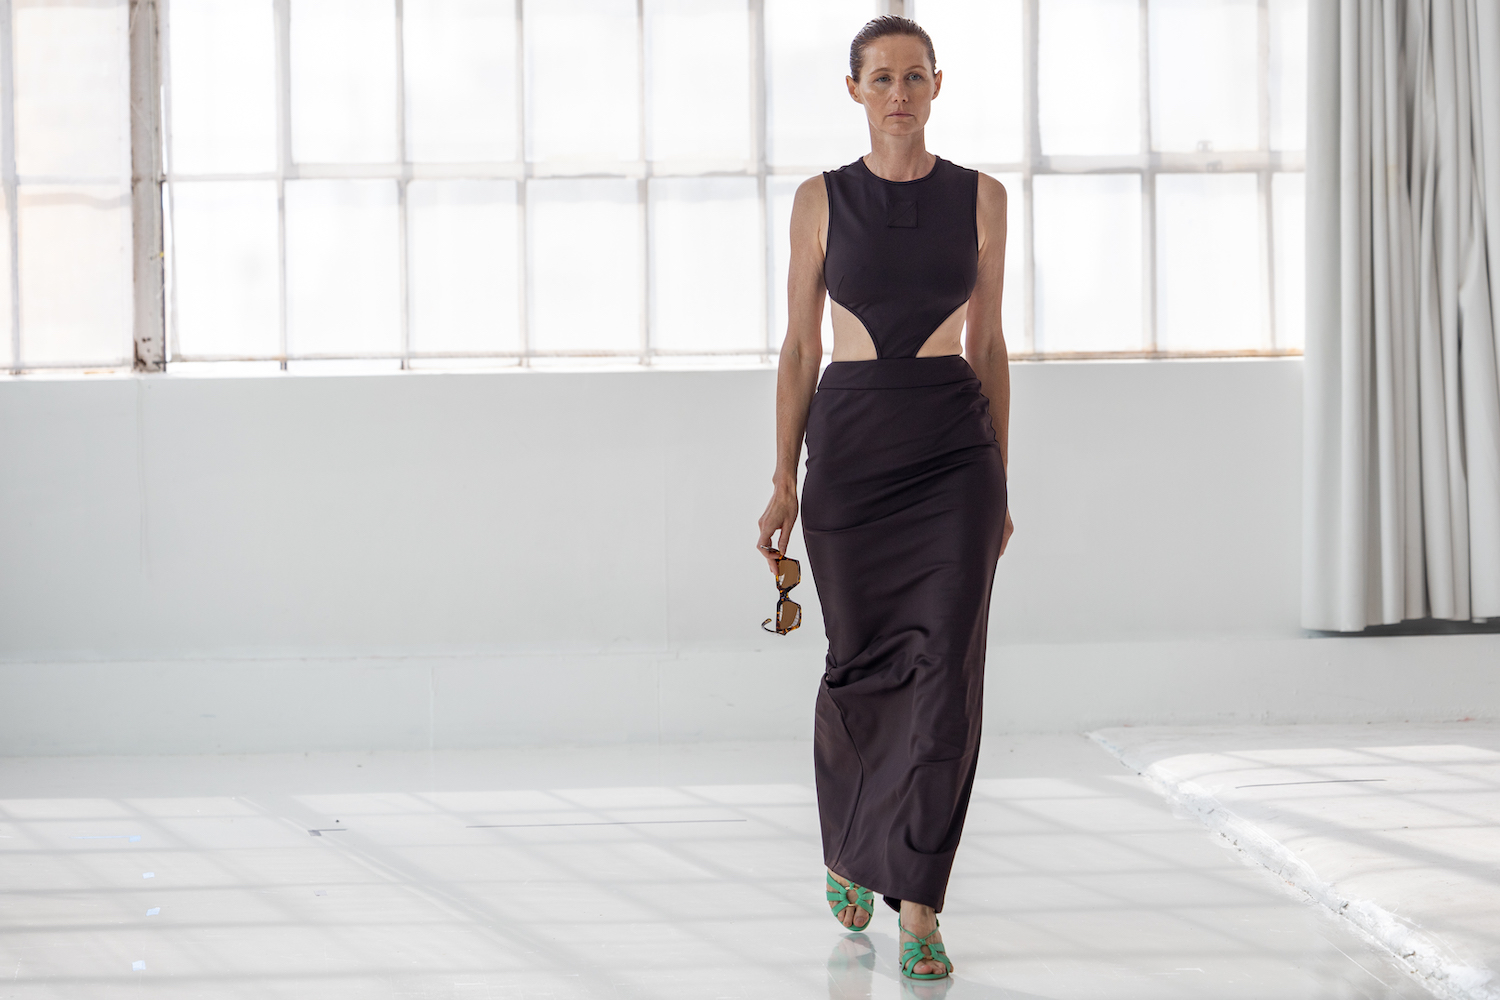 A model wearing a dark brown dress with teal shoes walks down a small runway. The model is wearing clothes from A.POTTS.